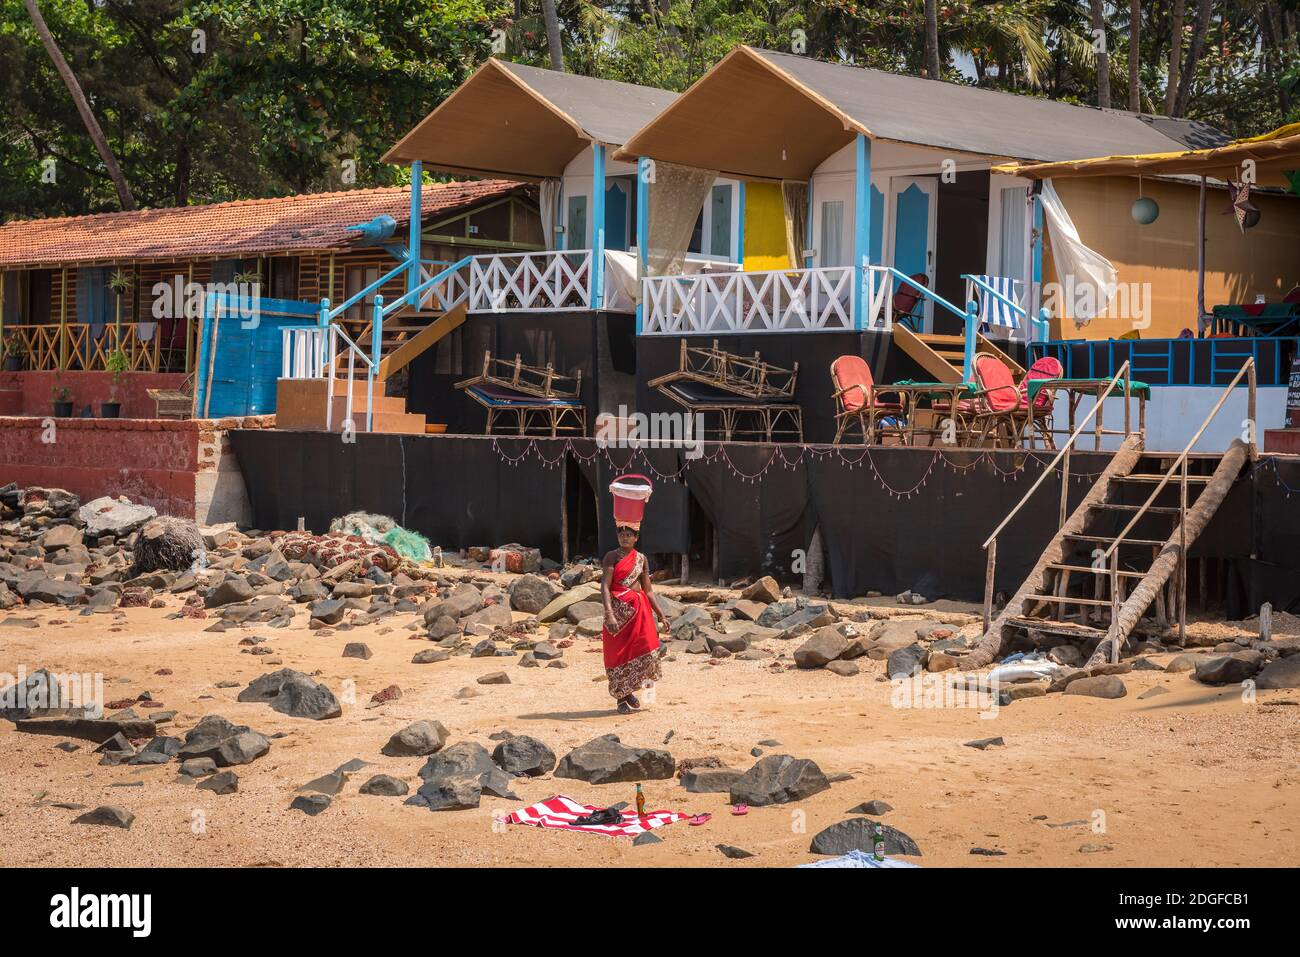 PALOLEM, GOA, INDIA - MARCH 19, 2019: Indian woman in traditional dress saree carries a bucket on her head along the village houses on the shore of th Stock Photo